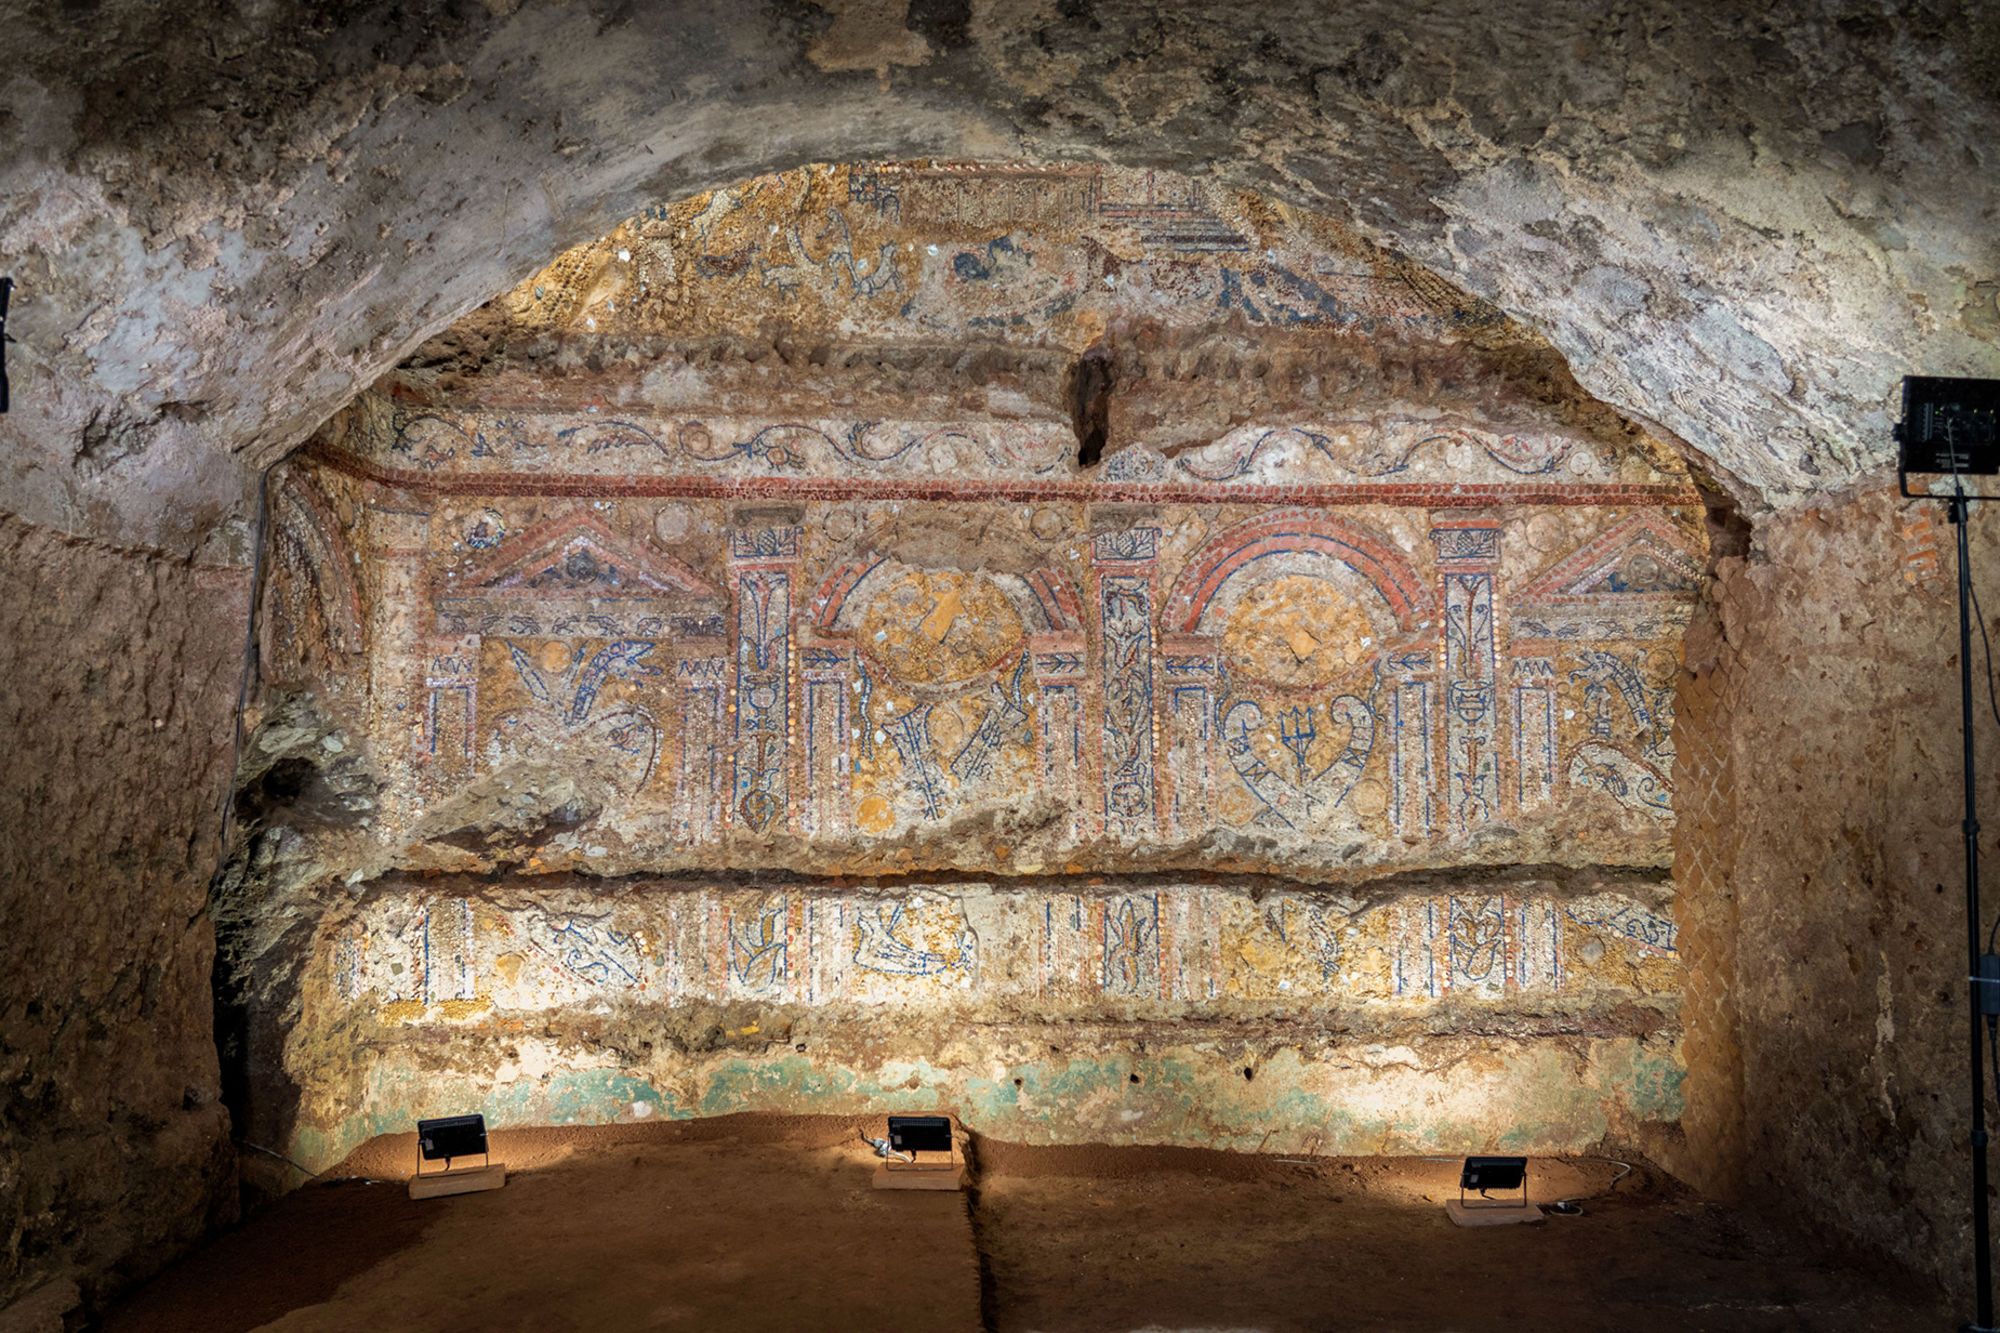 The 2000-year-old shell grotto was used as an outdoor dining room and features a sizeable wall mosaic featuring brightly colored shells, coral and glass.